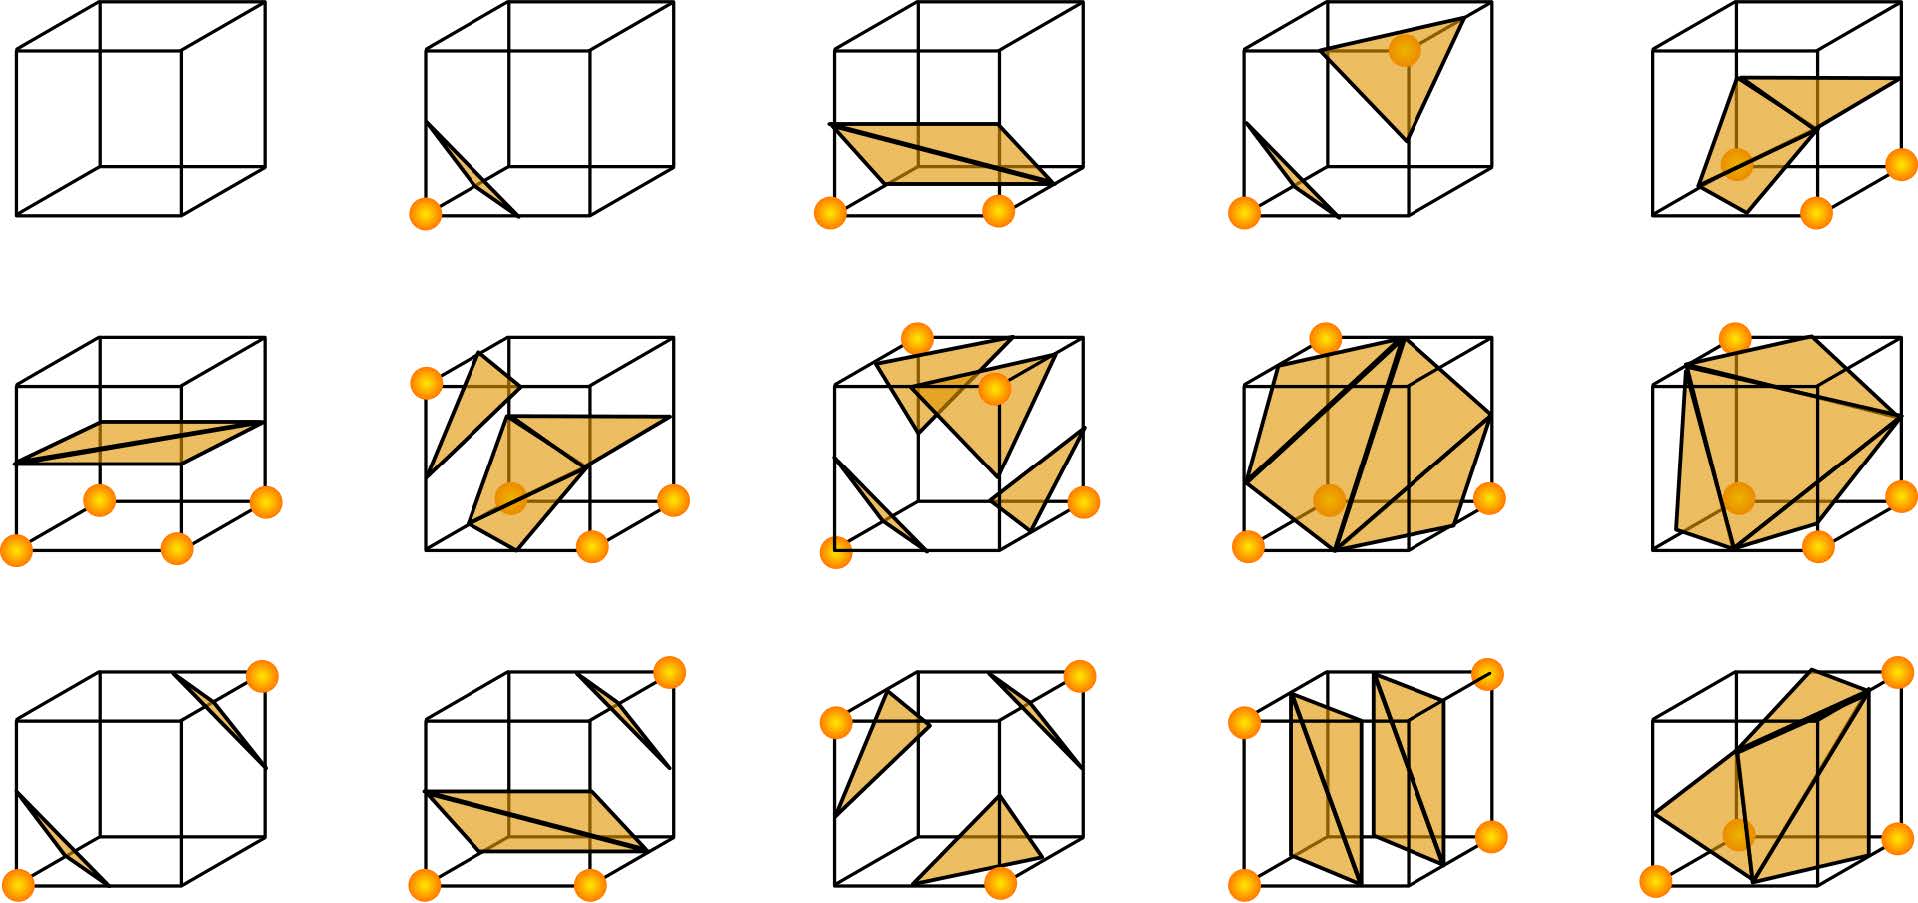 The bases cases of possible cube configurations